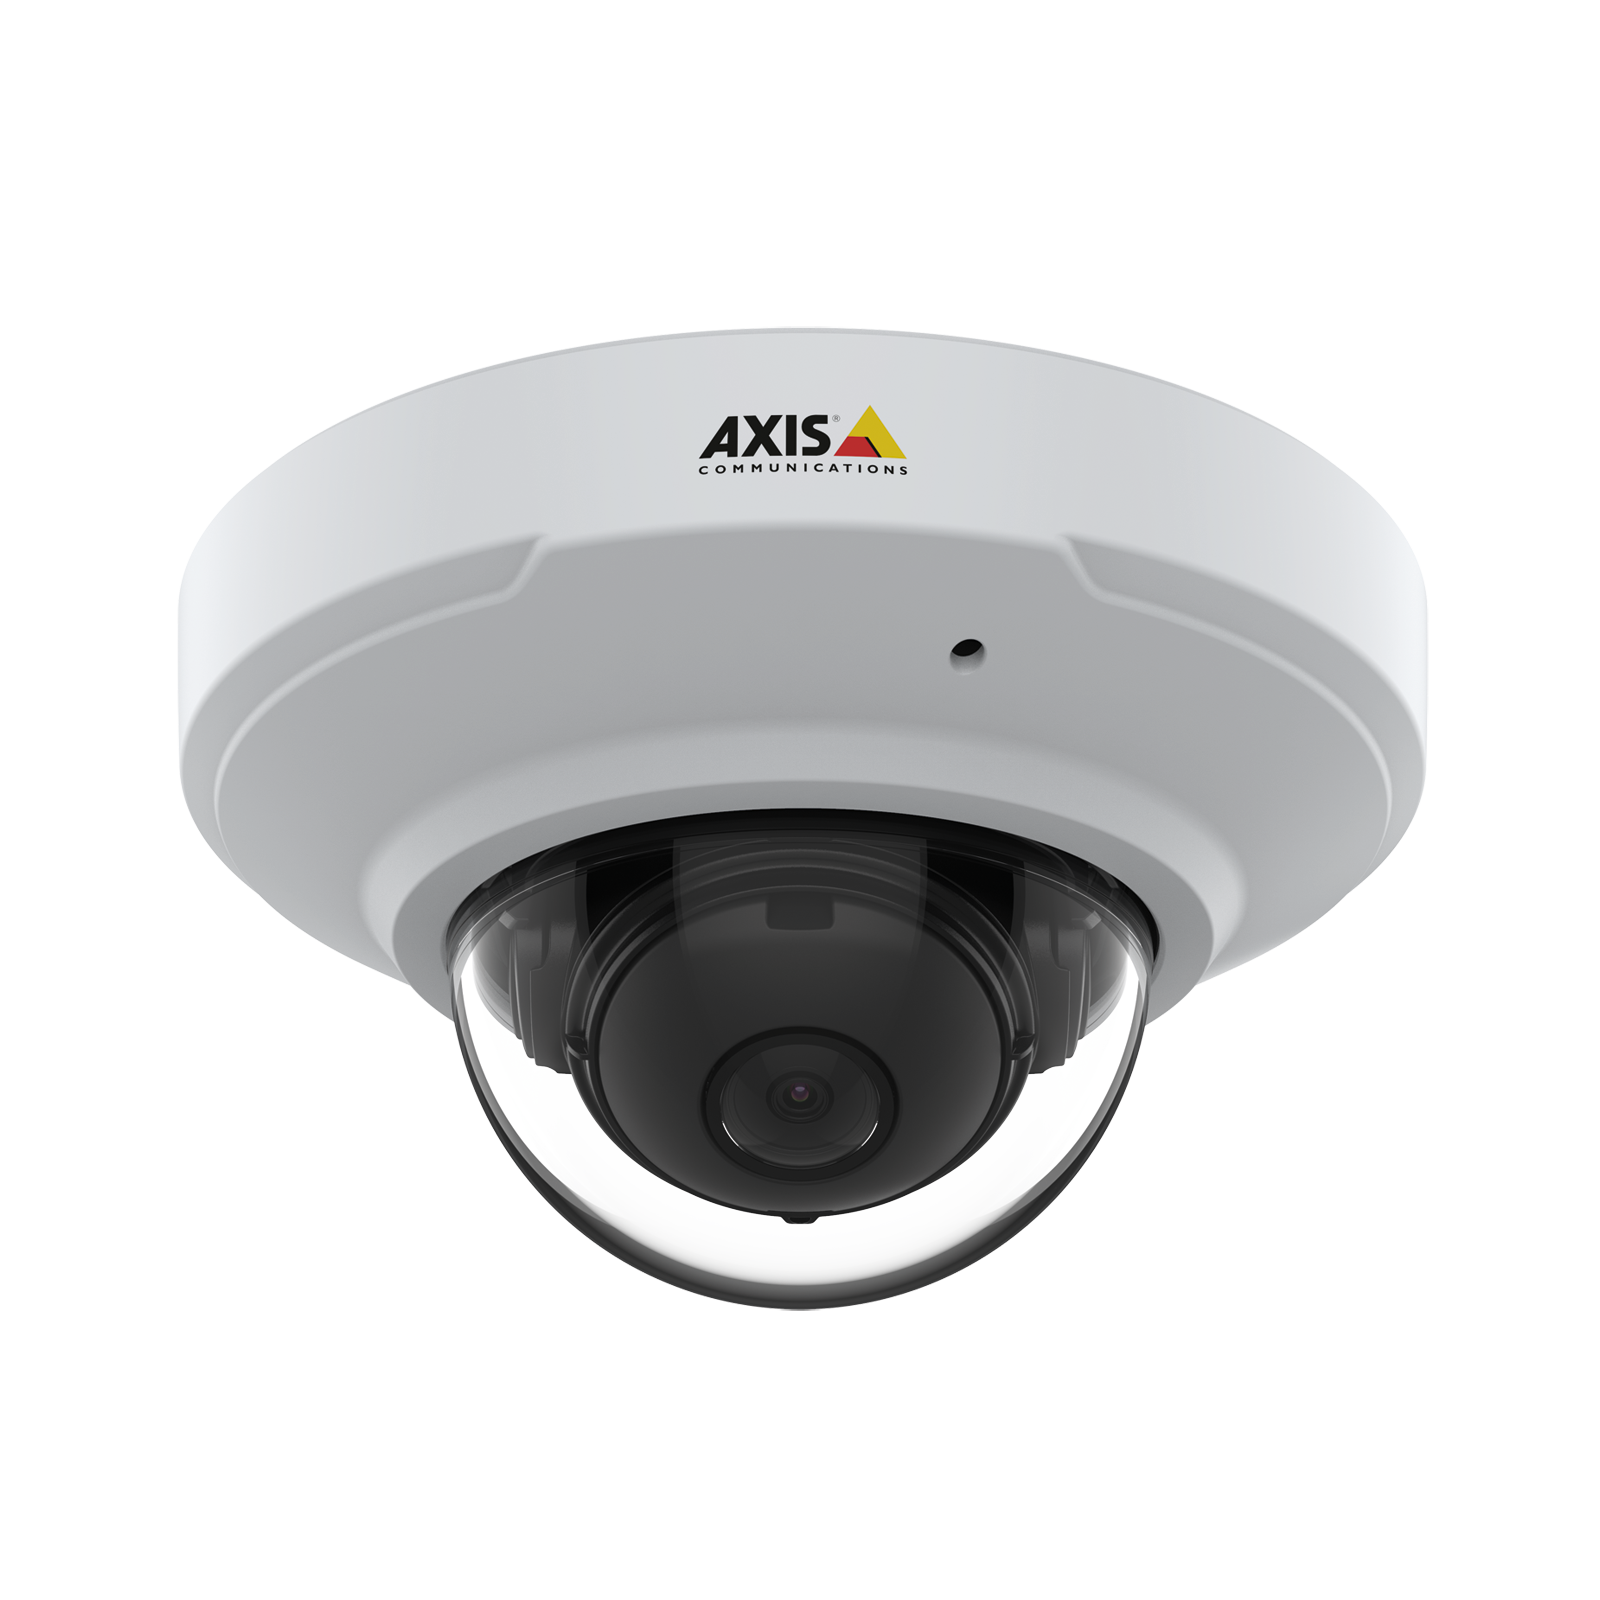 AXIS M3075-V Network Camera | Axis Communications